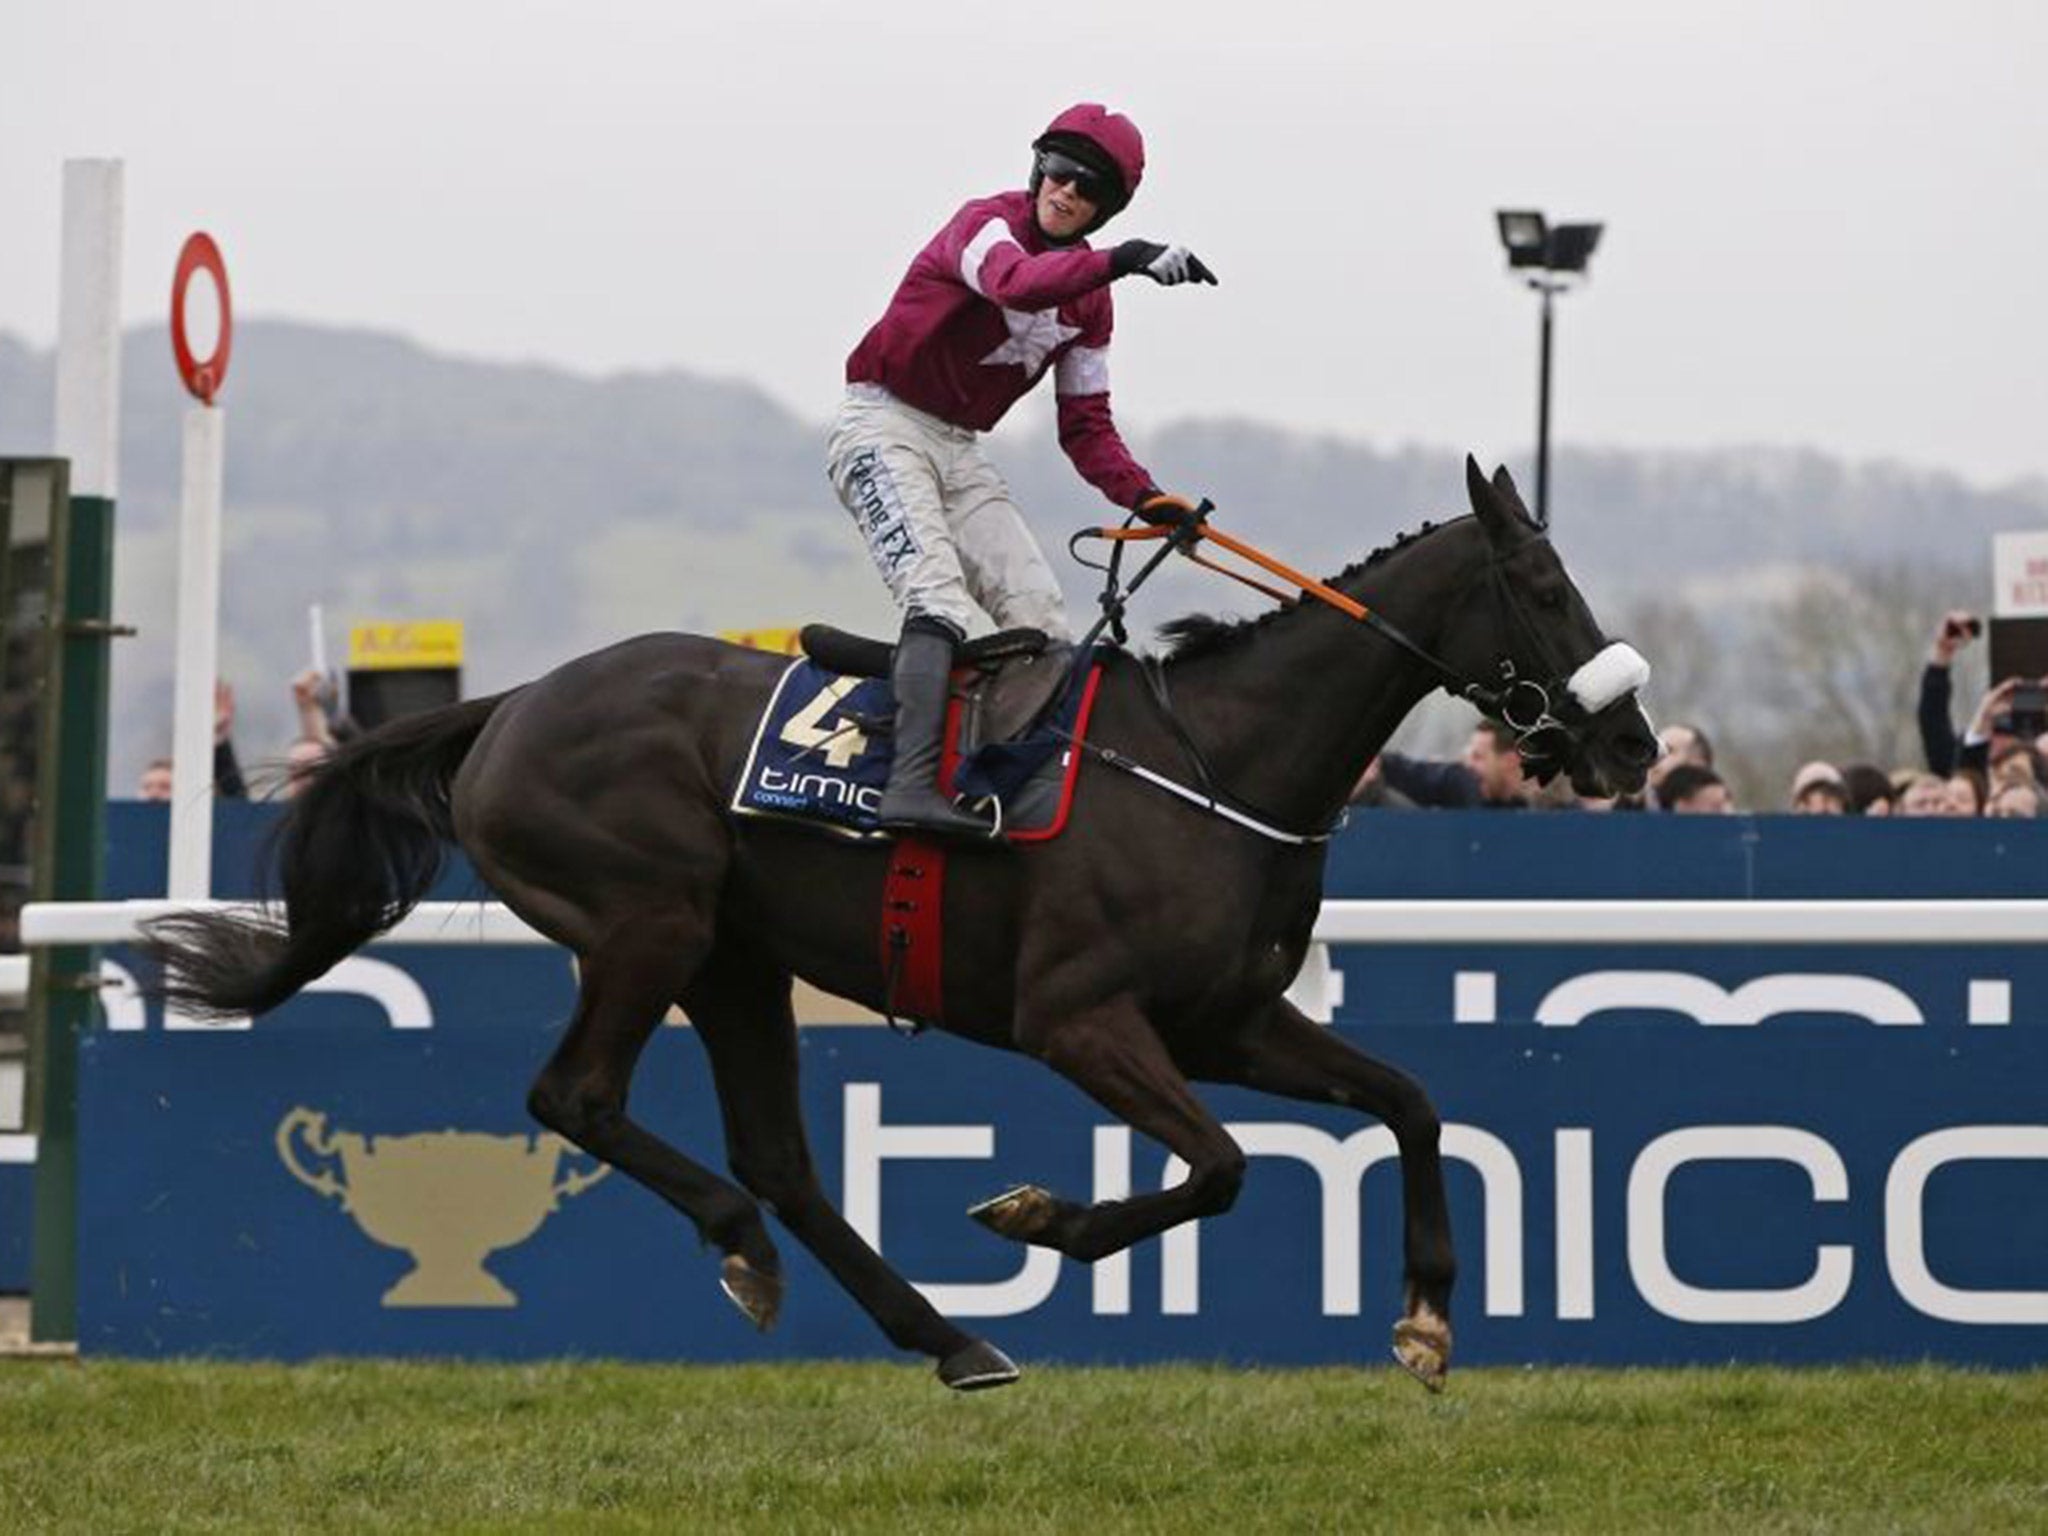 Bryan Cooper celebrates after riding Don Cossack to victory in the Cheltenham Gold Cup